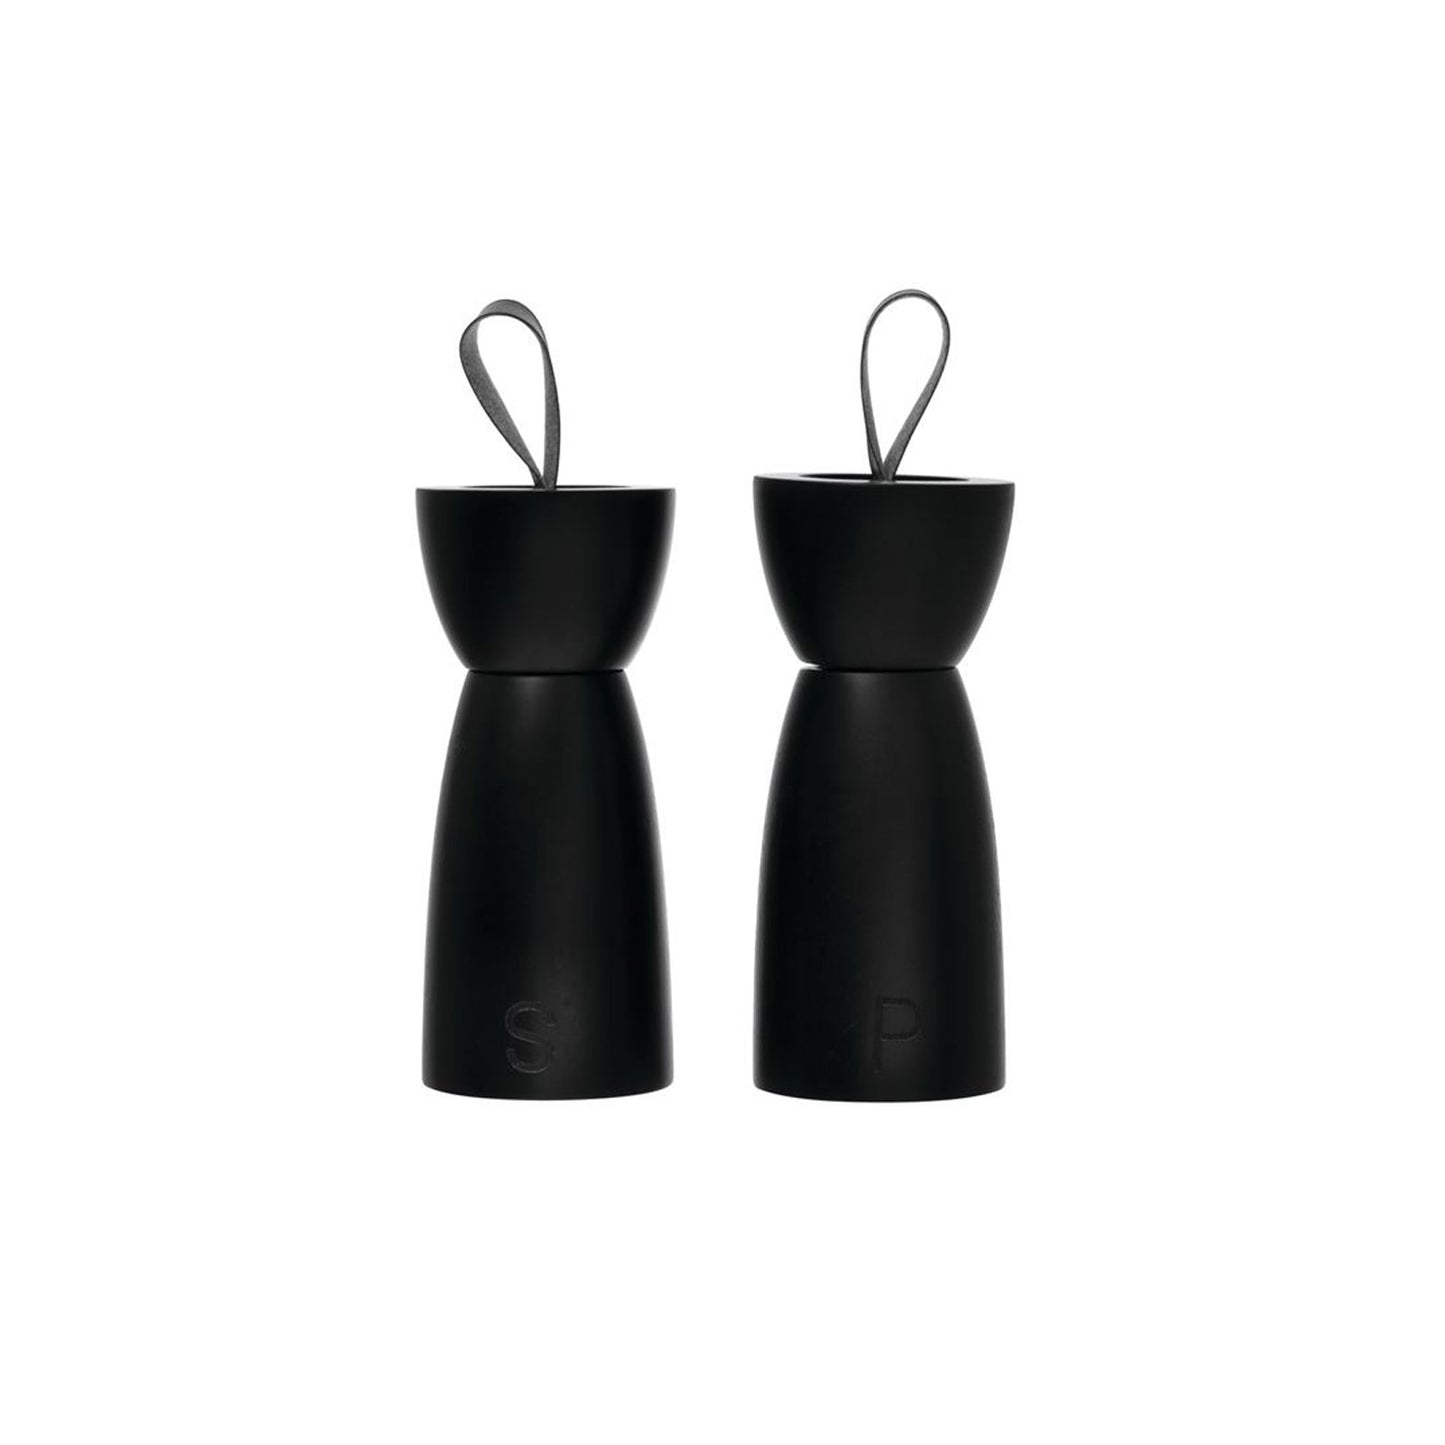 Rubber Wood Salt & Pepper Mills with Leather Handle